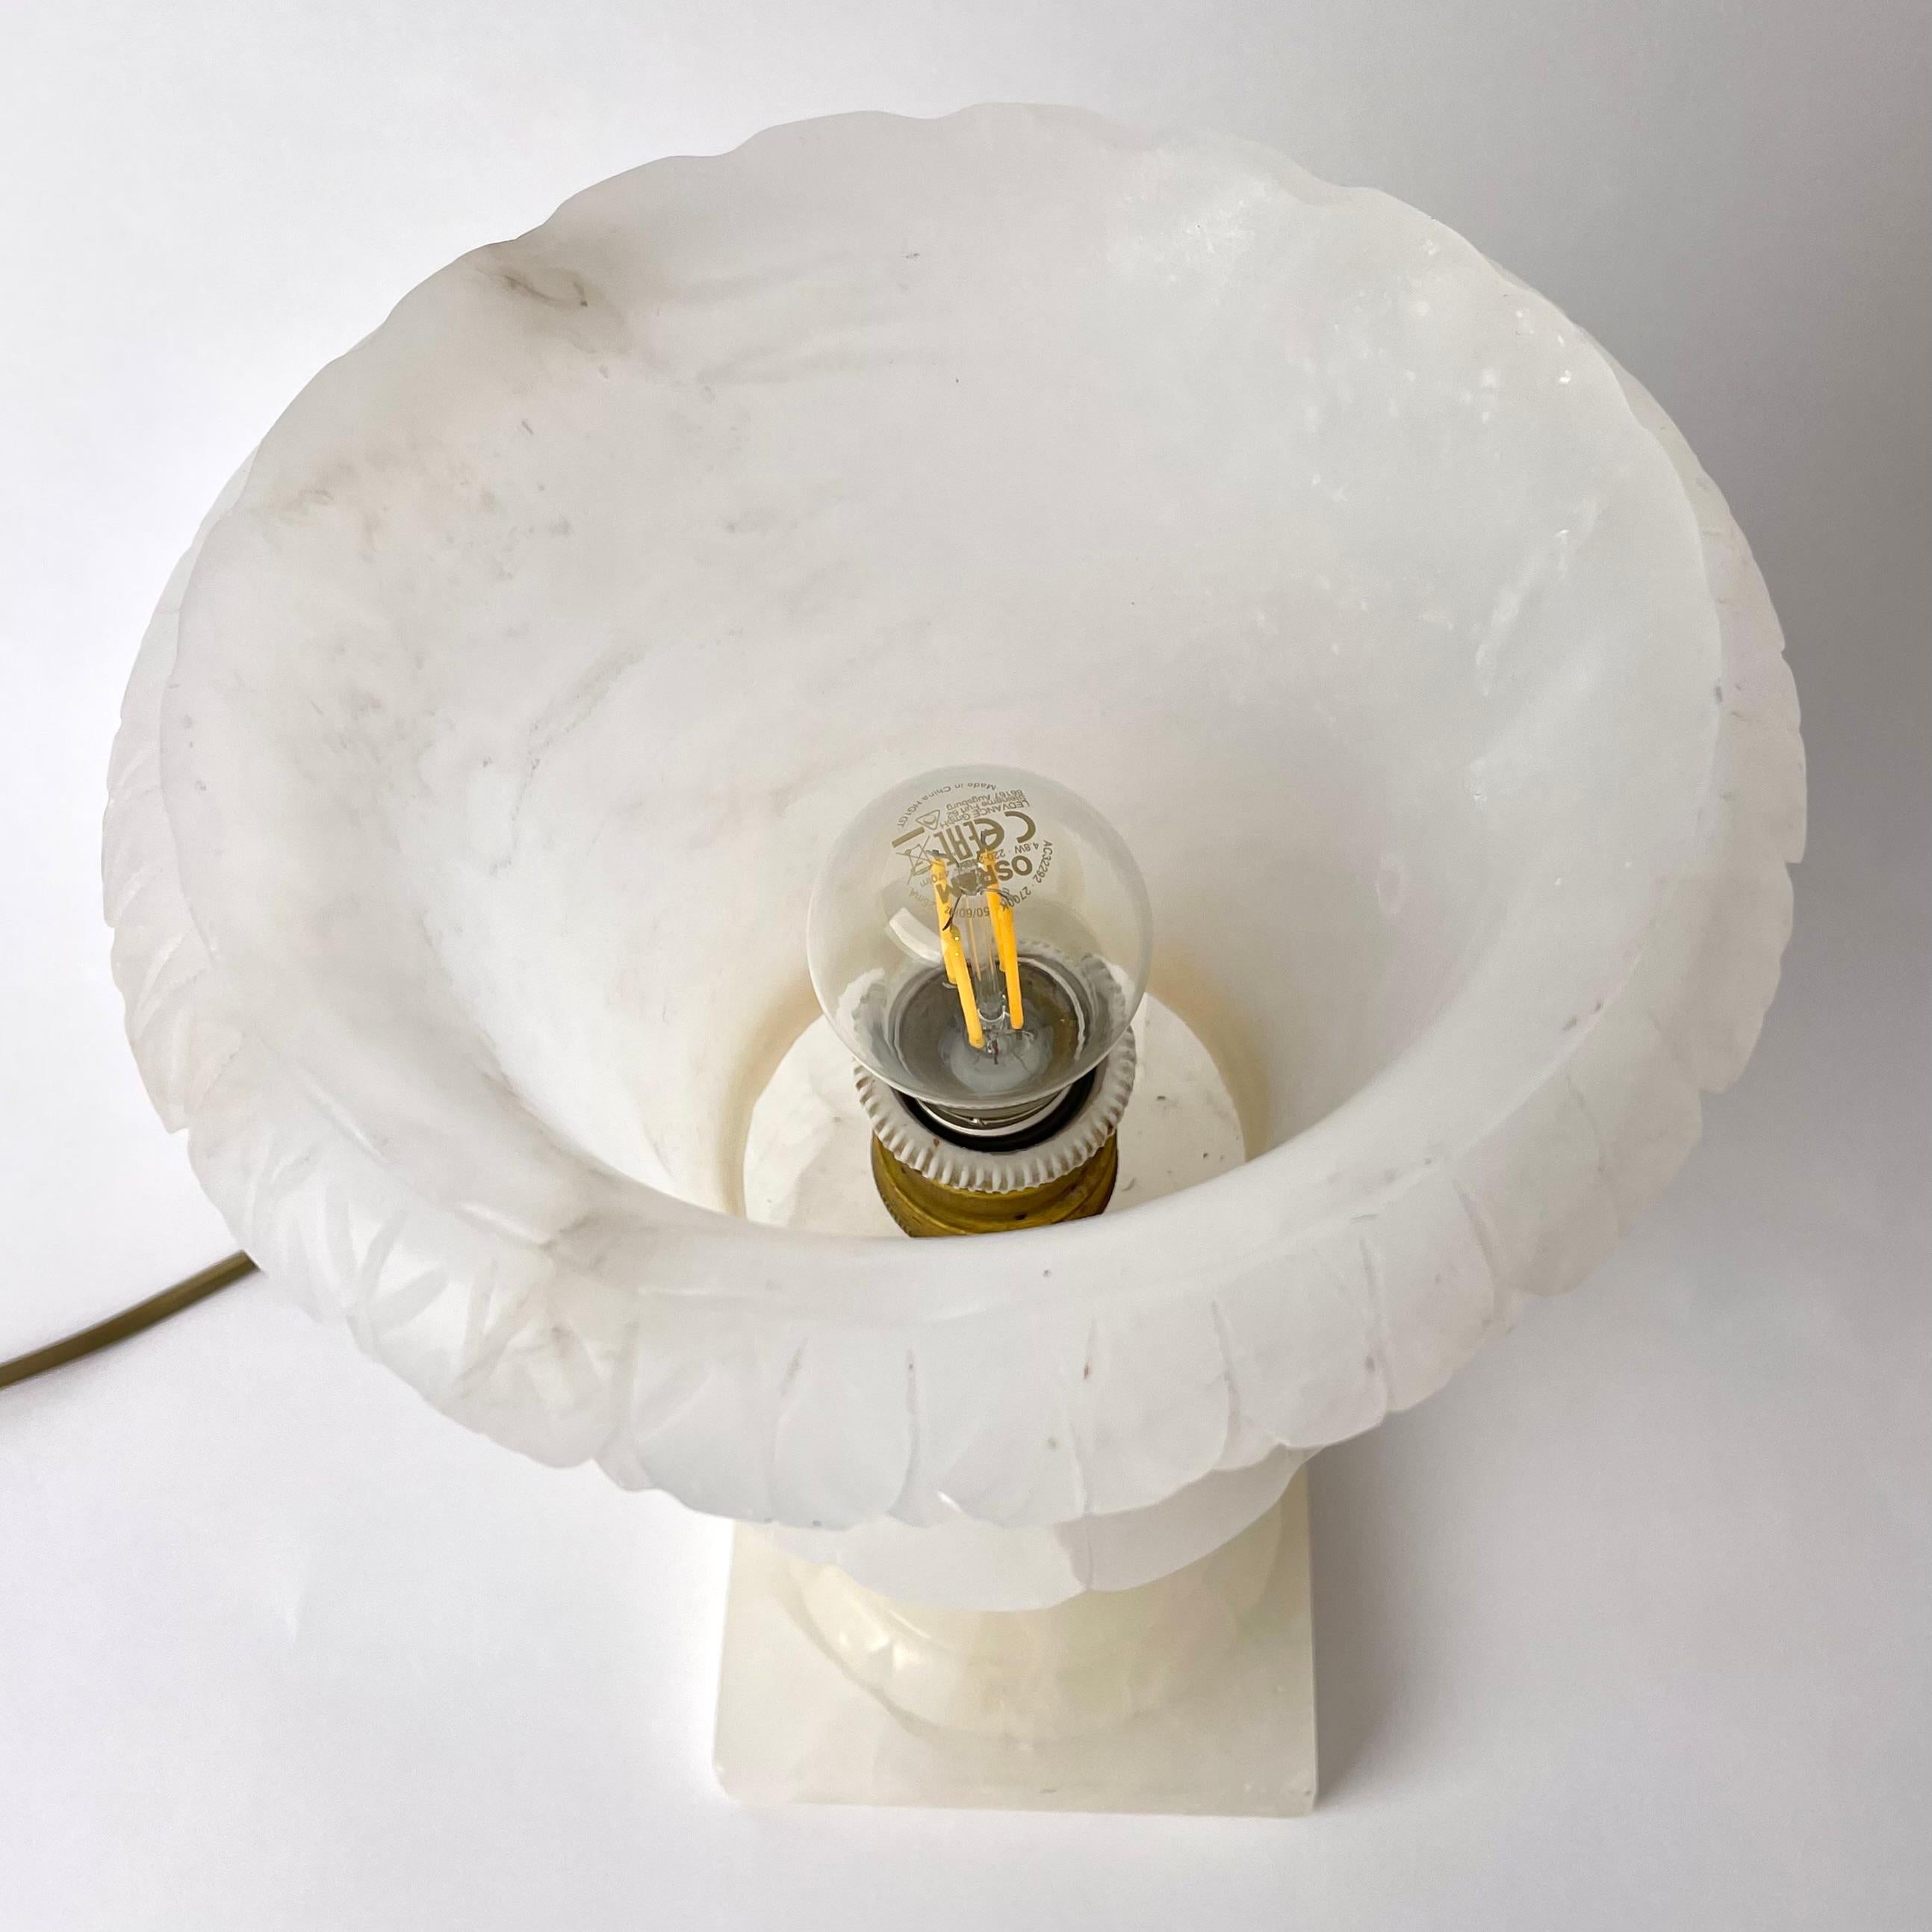 Elegant Alabaster Table Lamp in the Shape of a Classical Urn, Early 20th Century For Sale 3